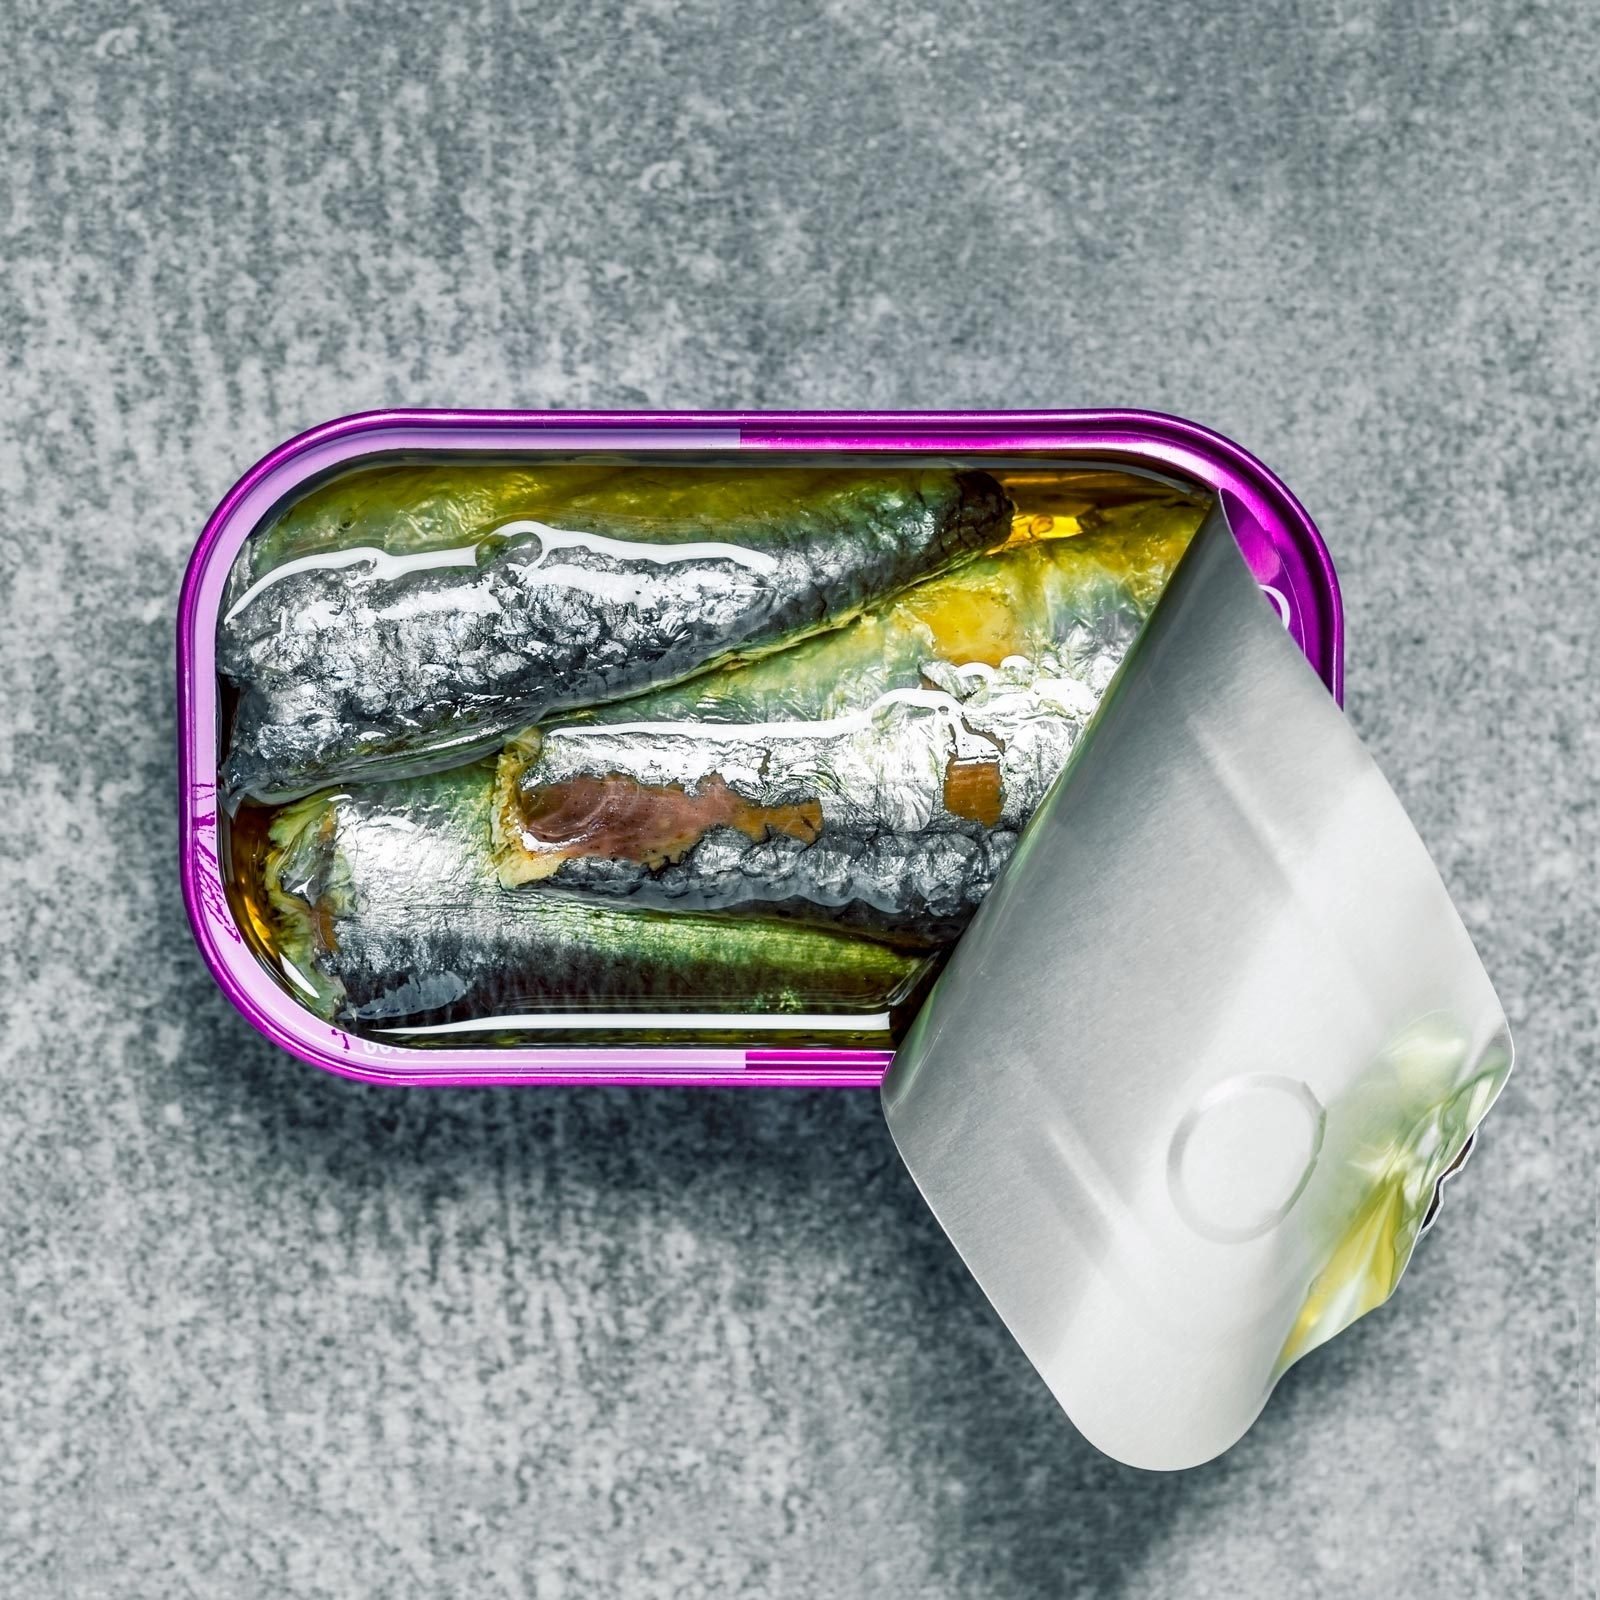 https://www.thehealthy.com/wp-content/uploads/2023/04/TH-tin-sardines-GettyImages-597924132-JVedit.jpg?resize=150%2C150